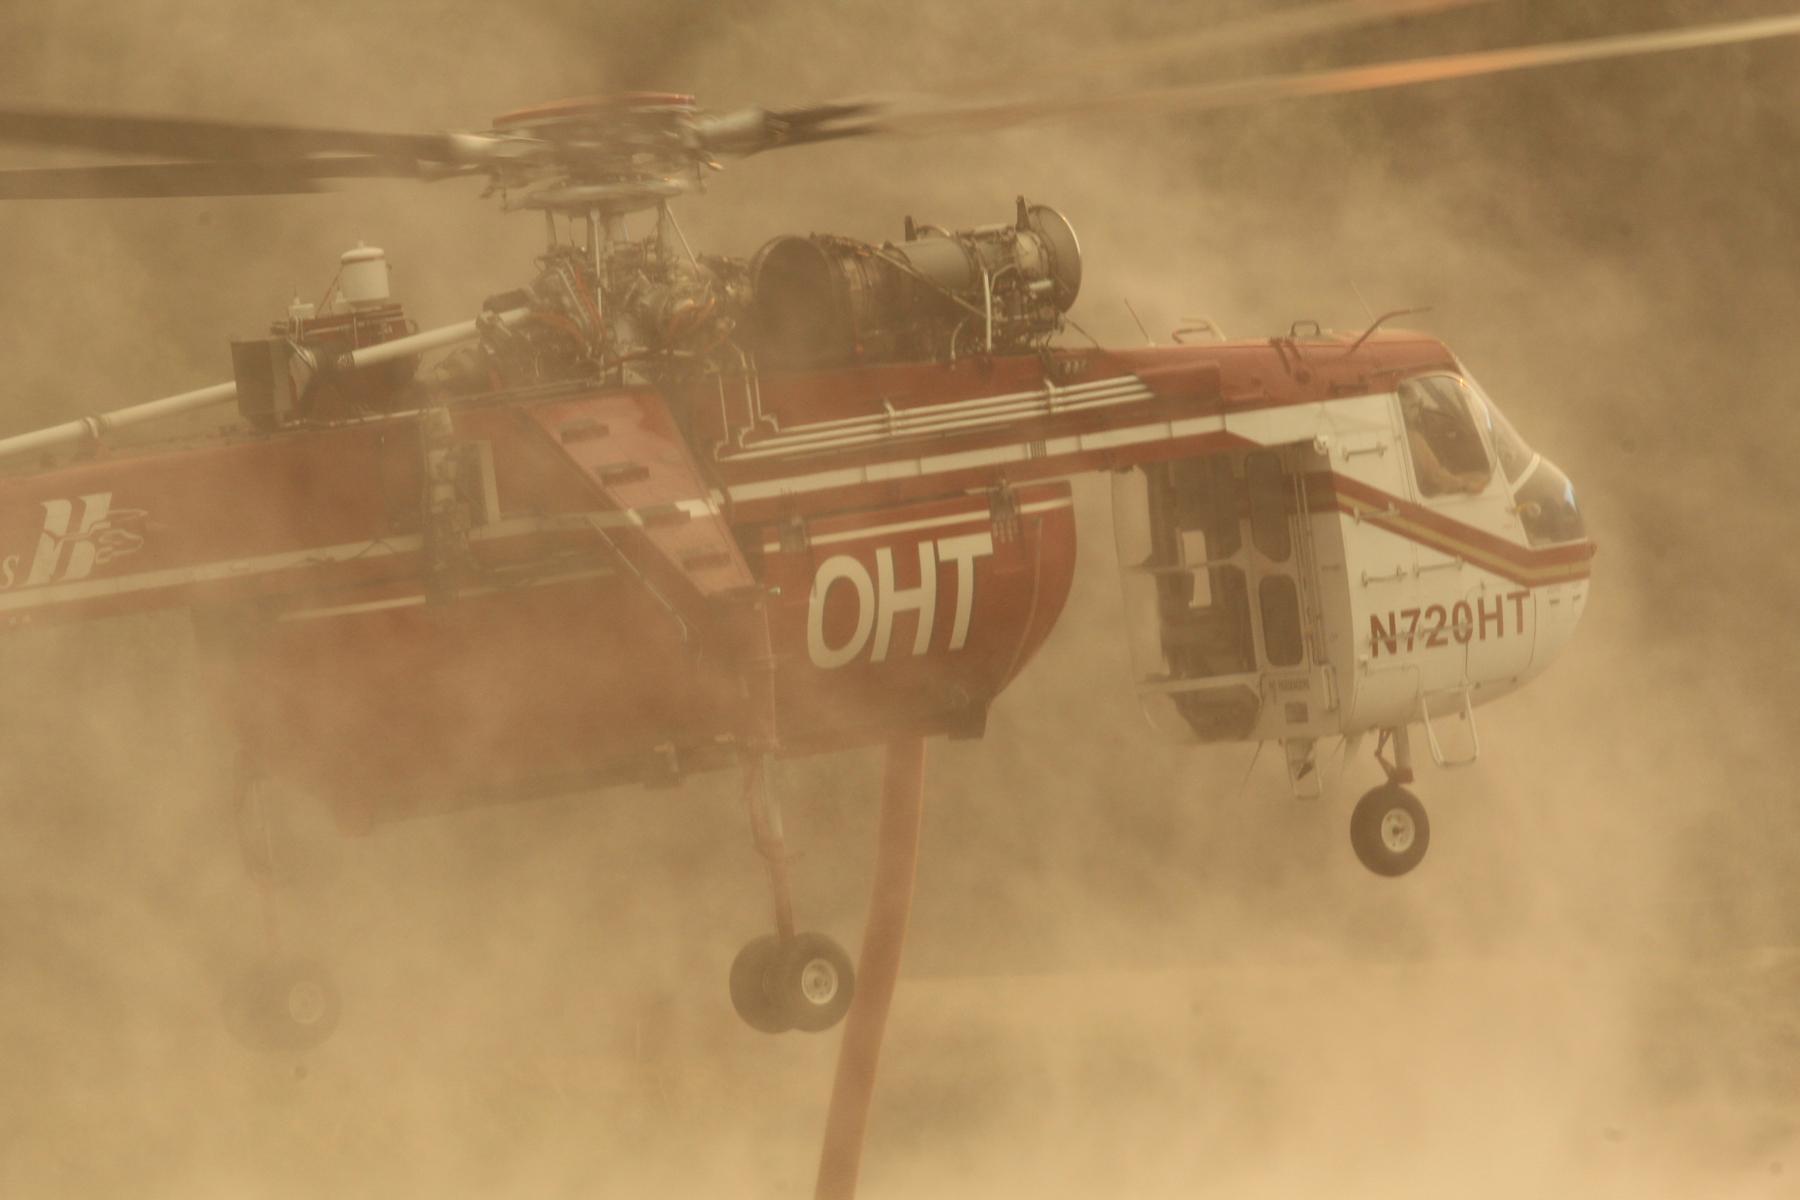 Sky Crane Helicopter Drafts Up To 2,500 Gallons. Photo: Mike McMillan - BIA